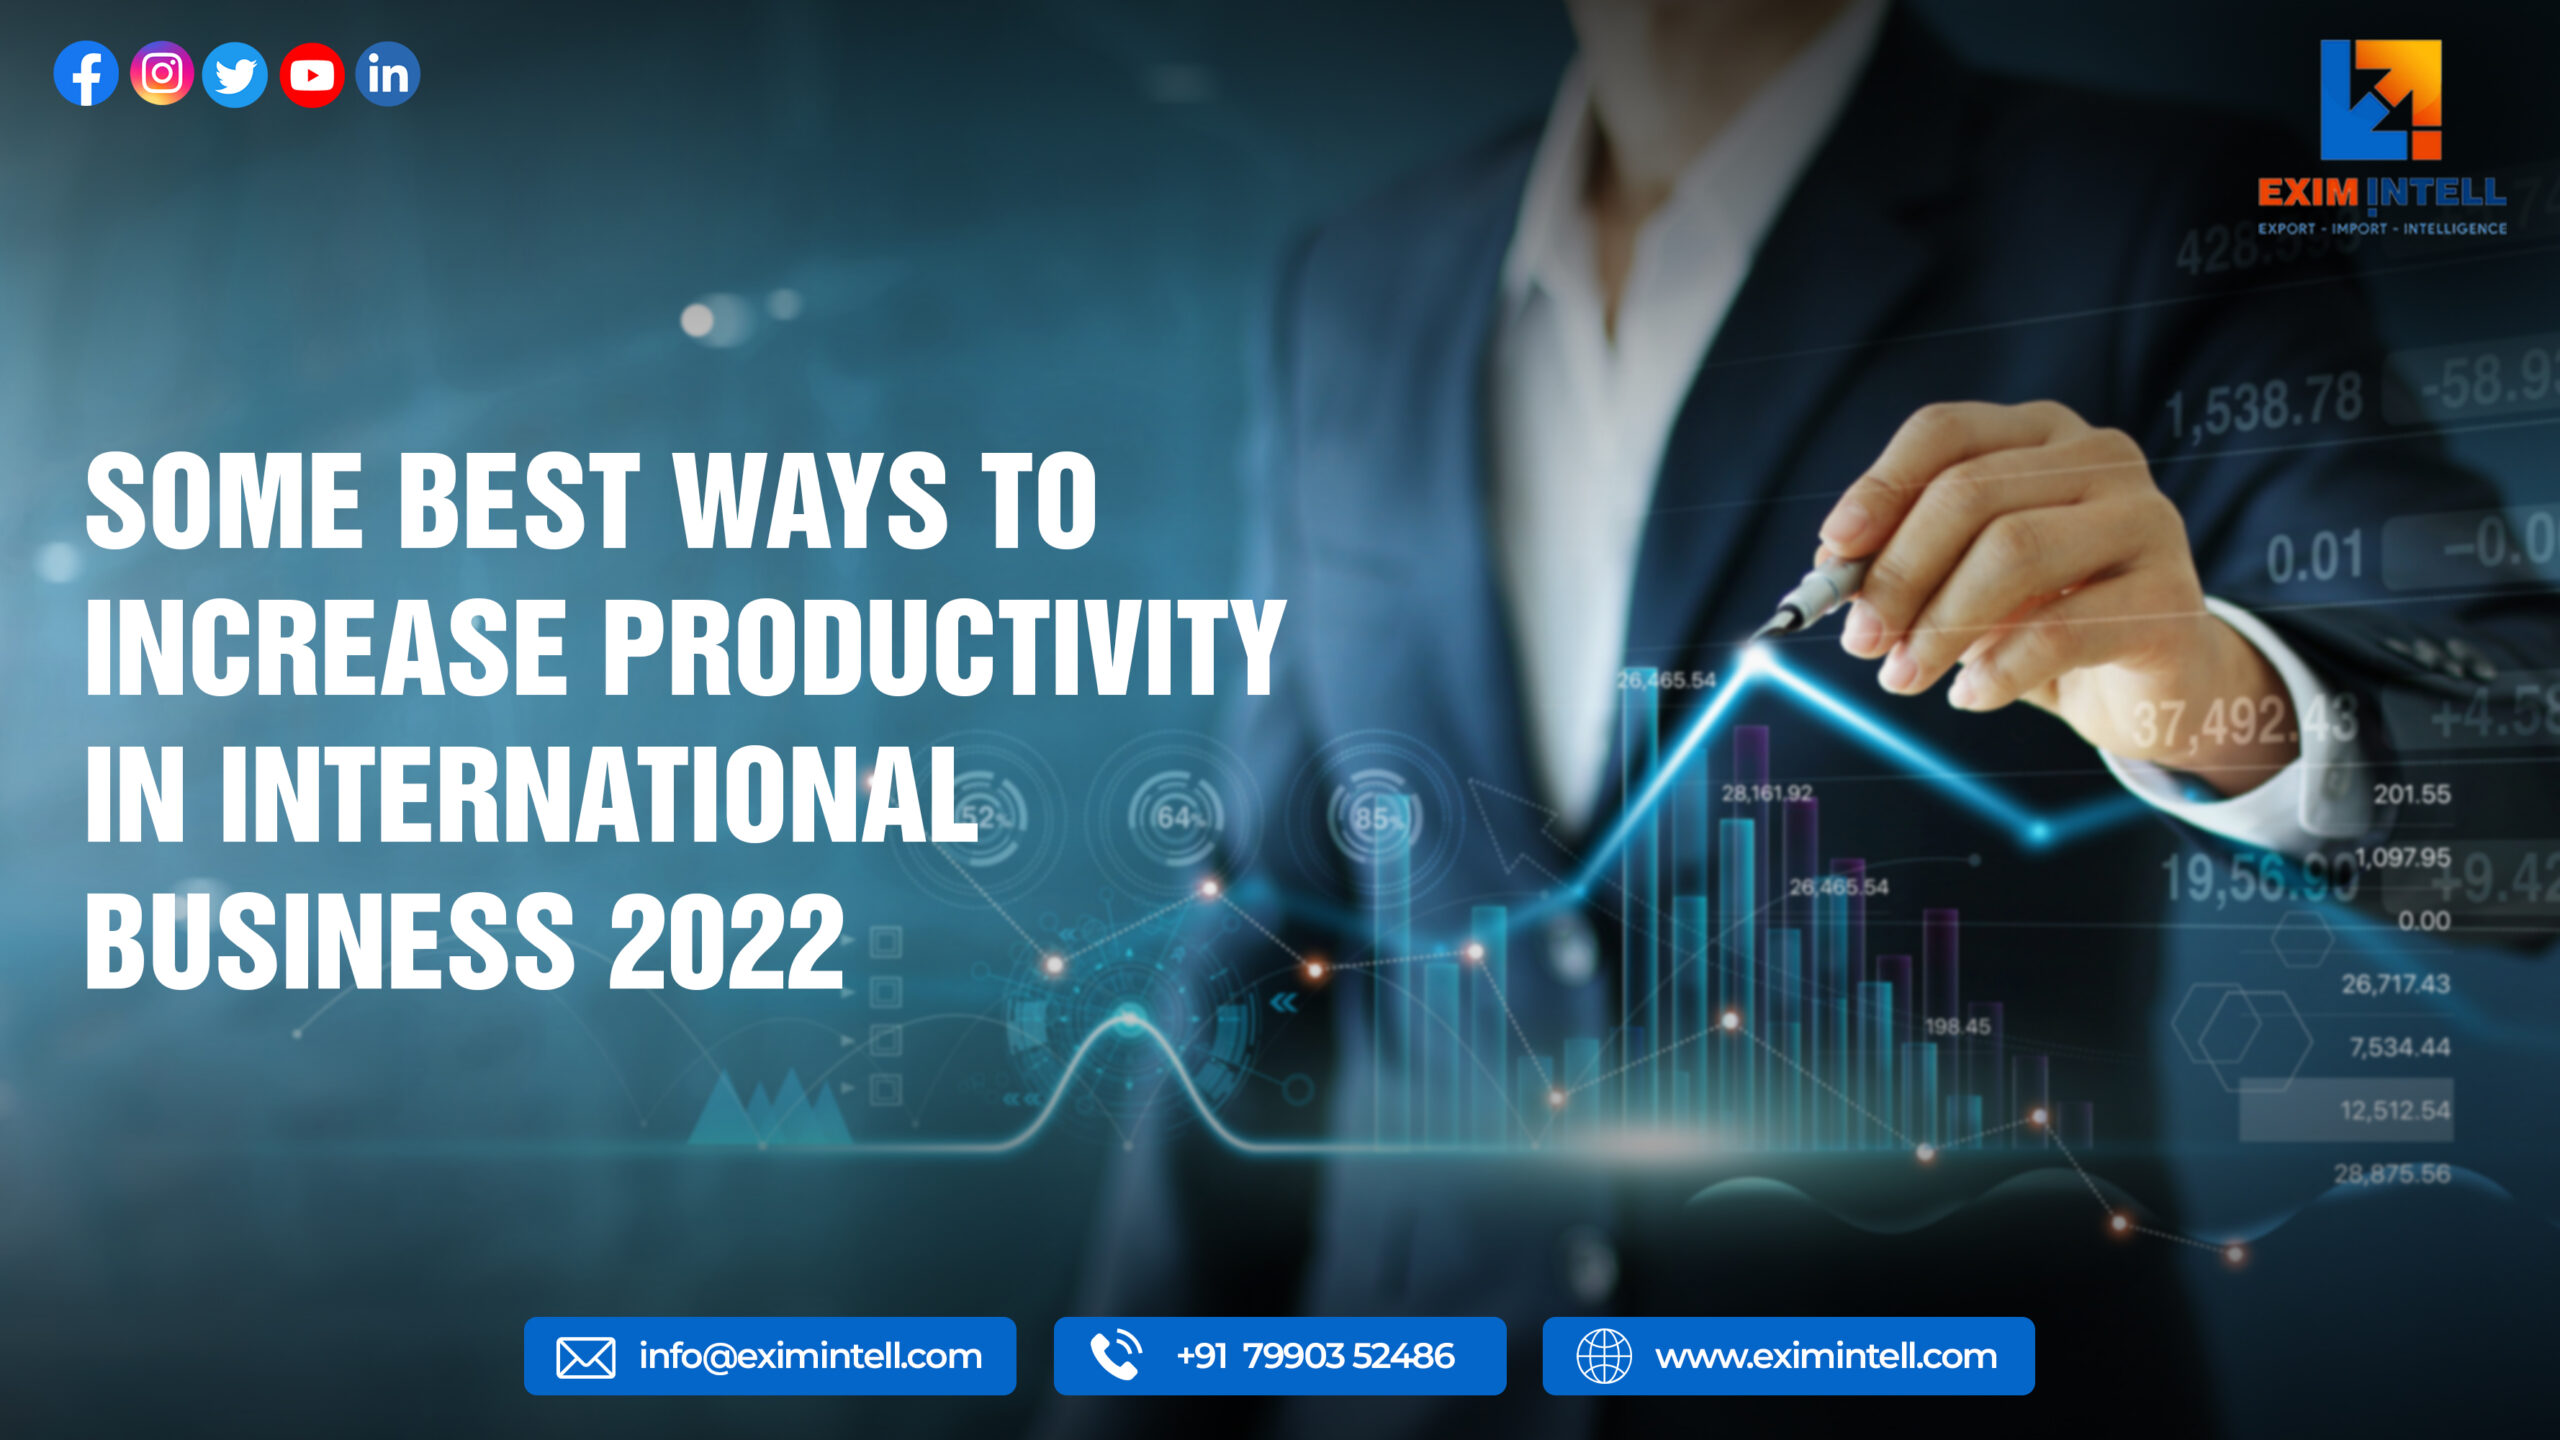 Some Best Ways To Increase Productivity In International Business 2022